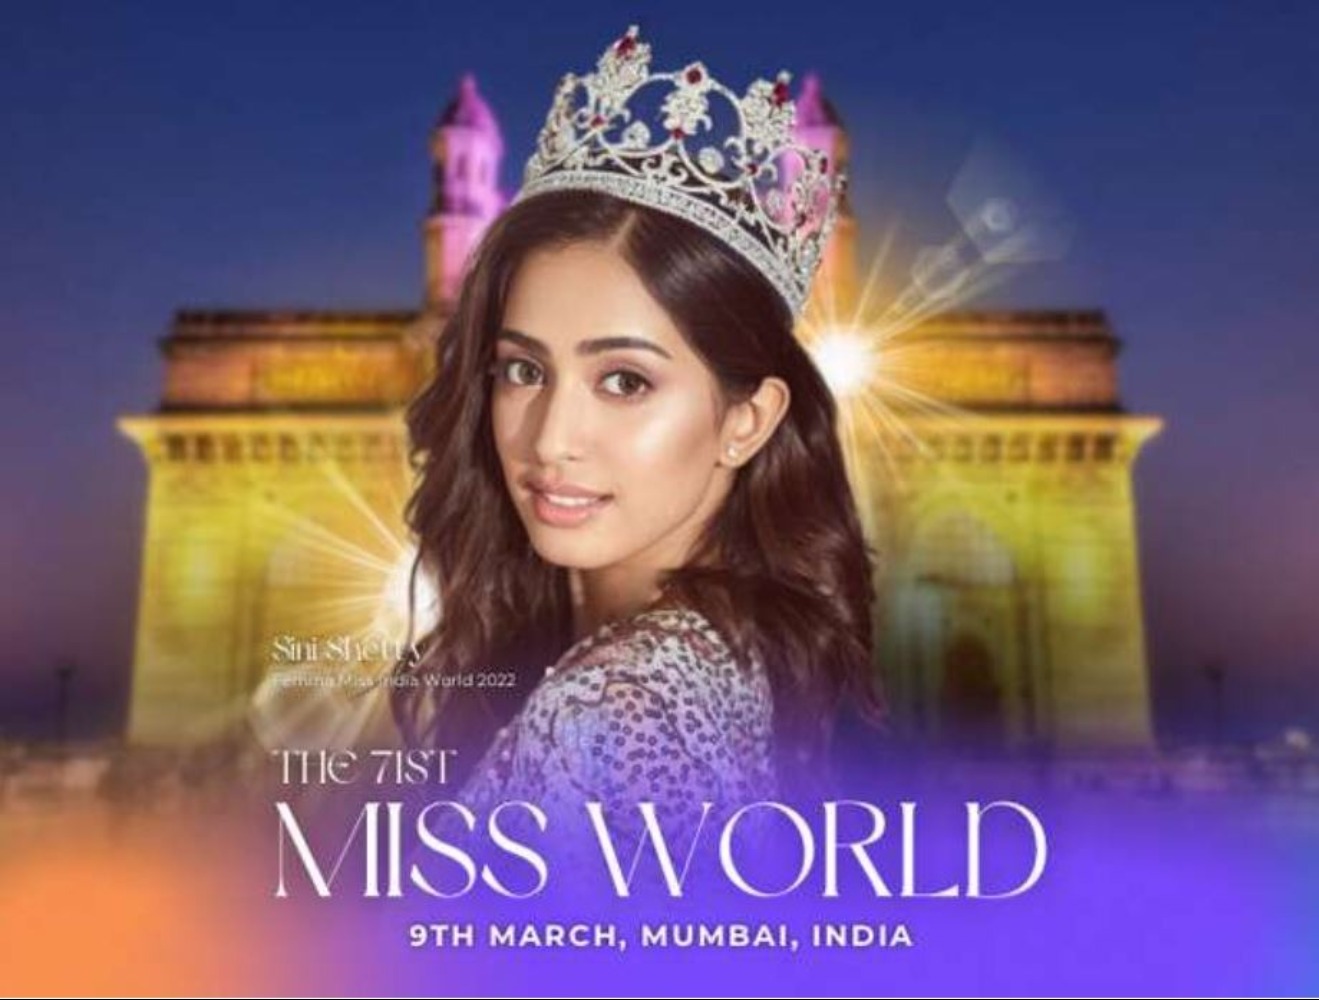 71st Miss World Competition: Official Fashion Designer Showcases Collection